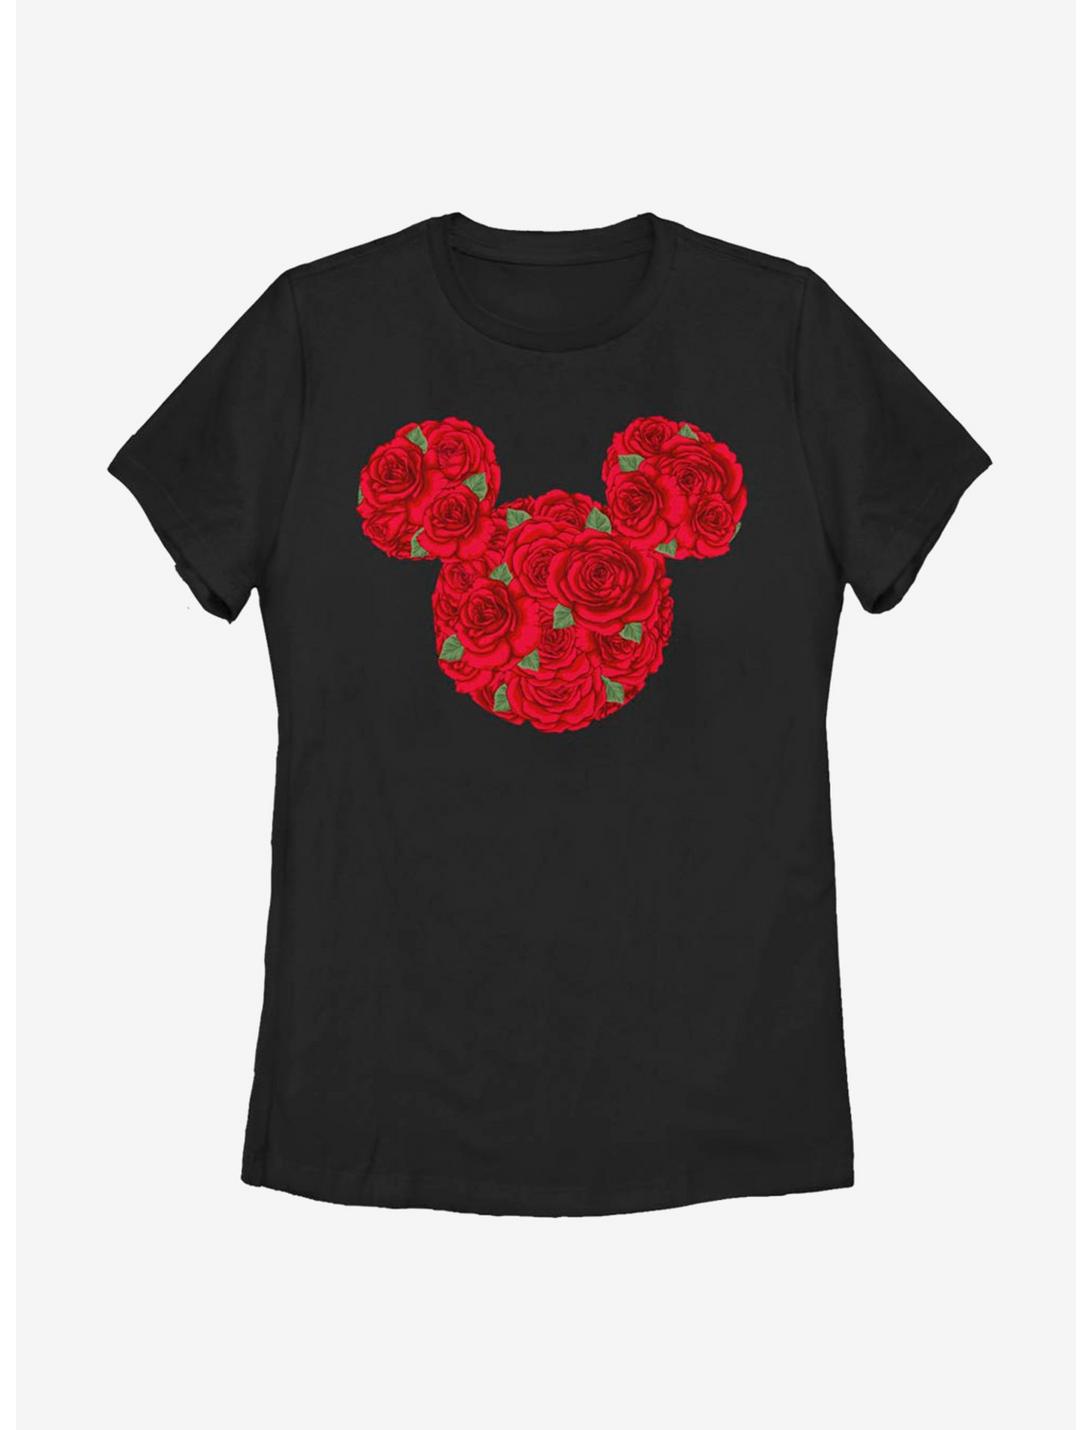 Disney Minnie Mouse Mickey Mouse Roses Womens T-Shirt, BLACK, hi-res